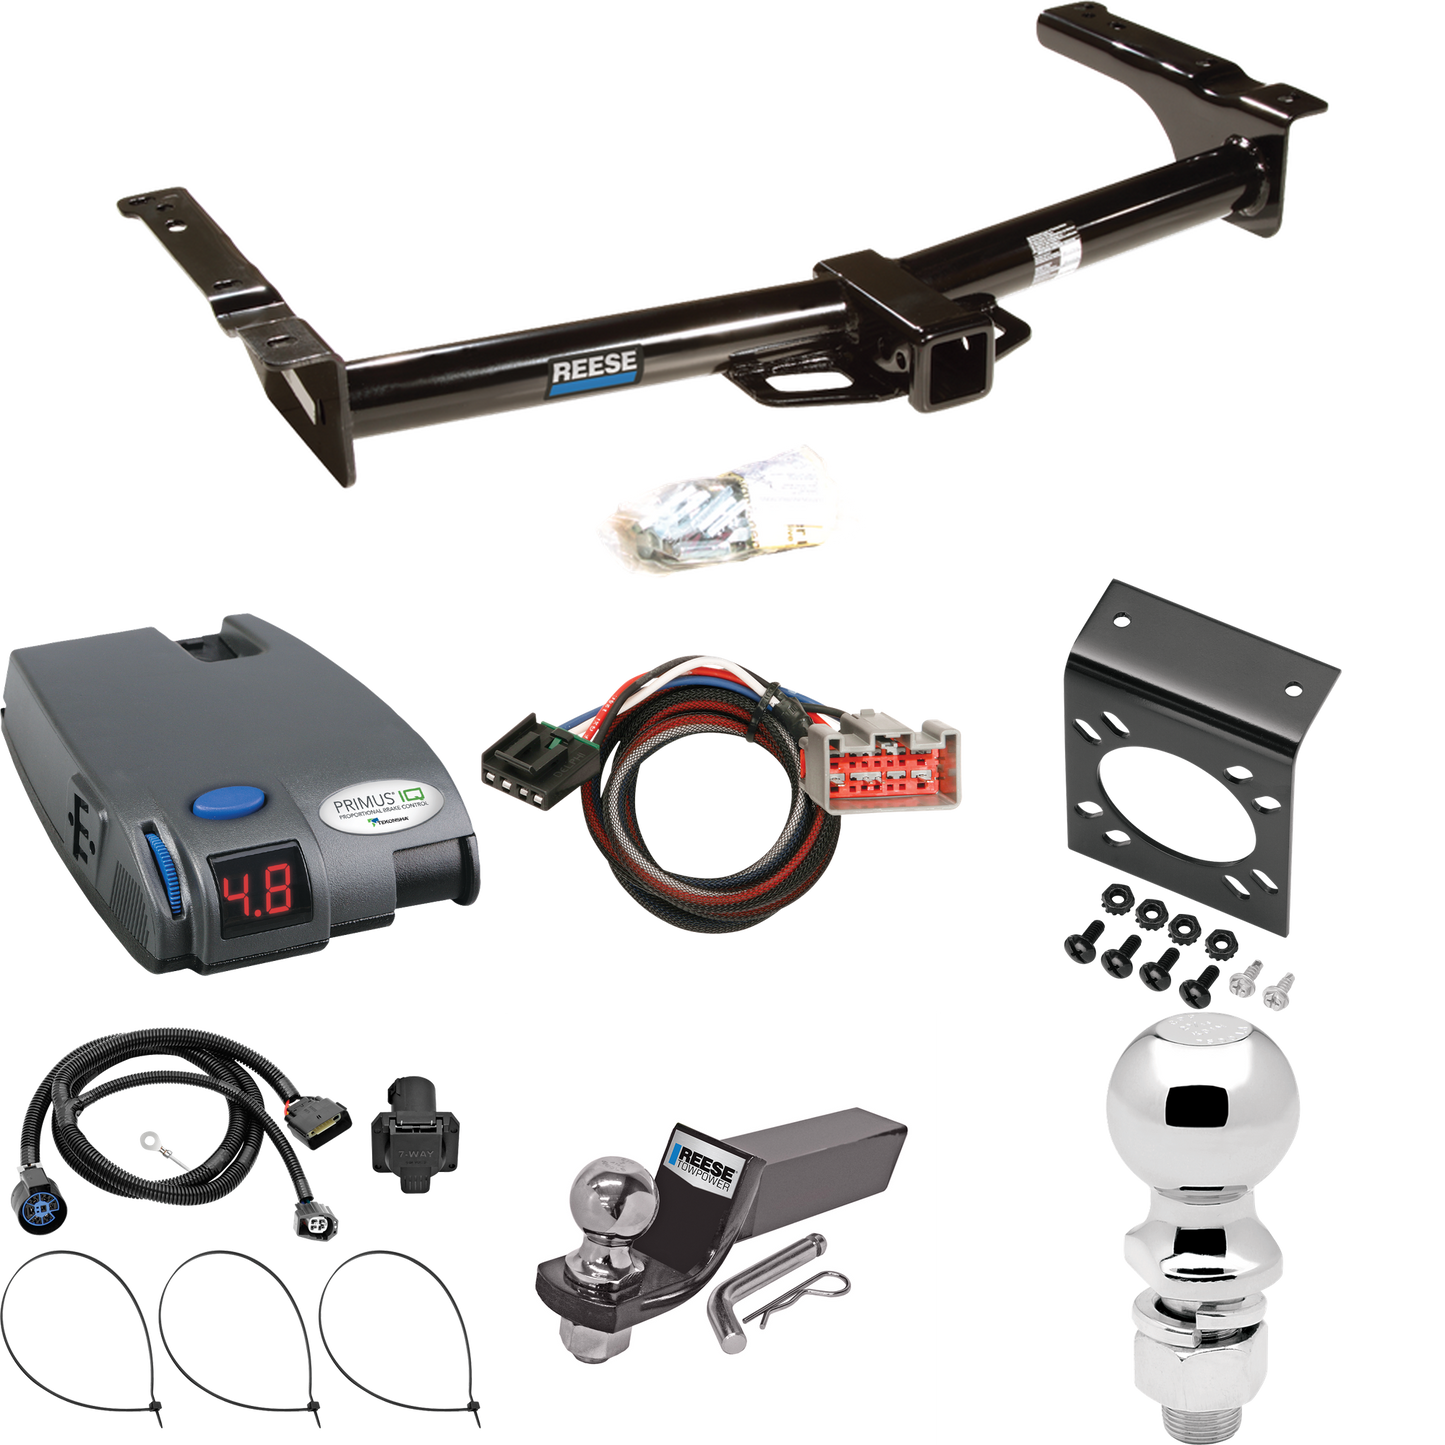 Fits 2009-2012 Ford E-350 Econoline Super Duty Trailer Hitch Tow PKG w/ Tekonsha Primus IQ Brake Control + Plug & Play BC Adapter + 7-Way RV Wiring + 2" & 2-5/16" Ball & Drop Mount (For (Prepped Class II Tow Package) Models) By Reese Towpower